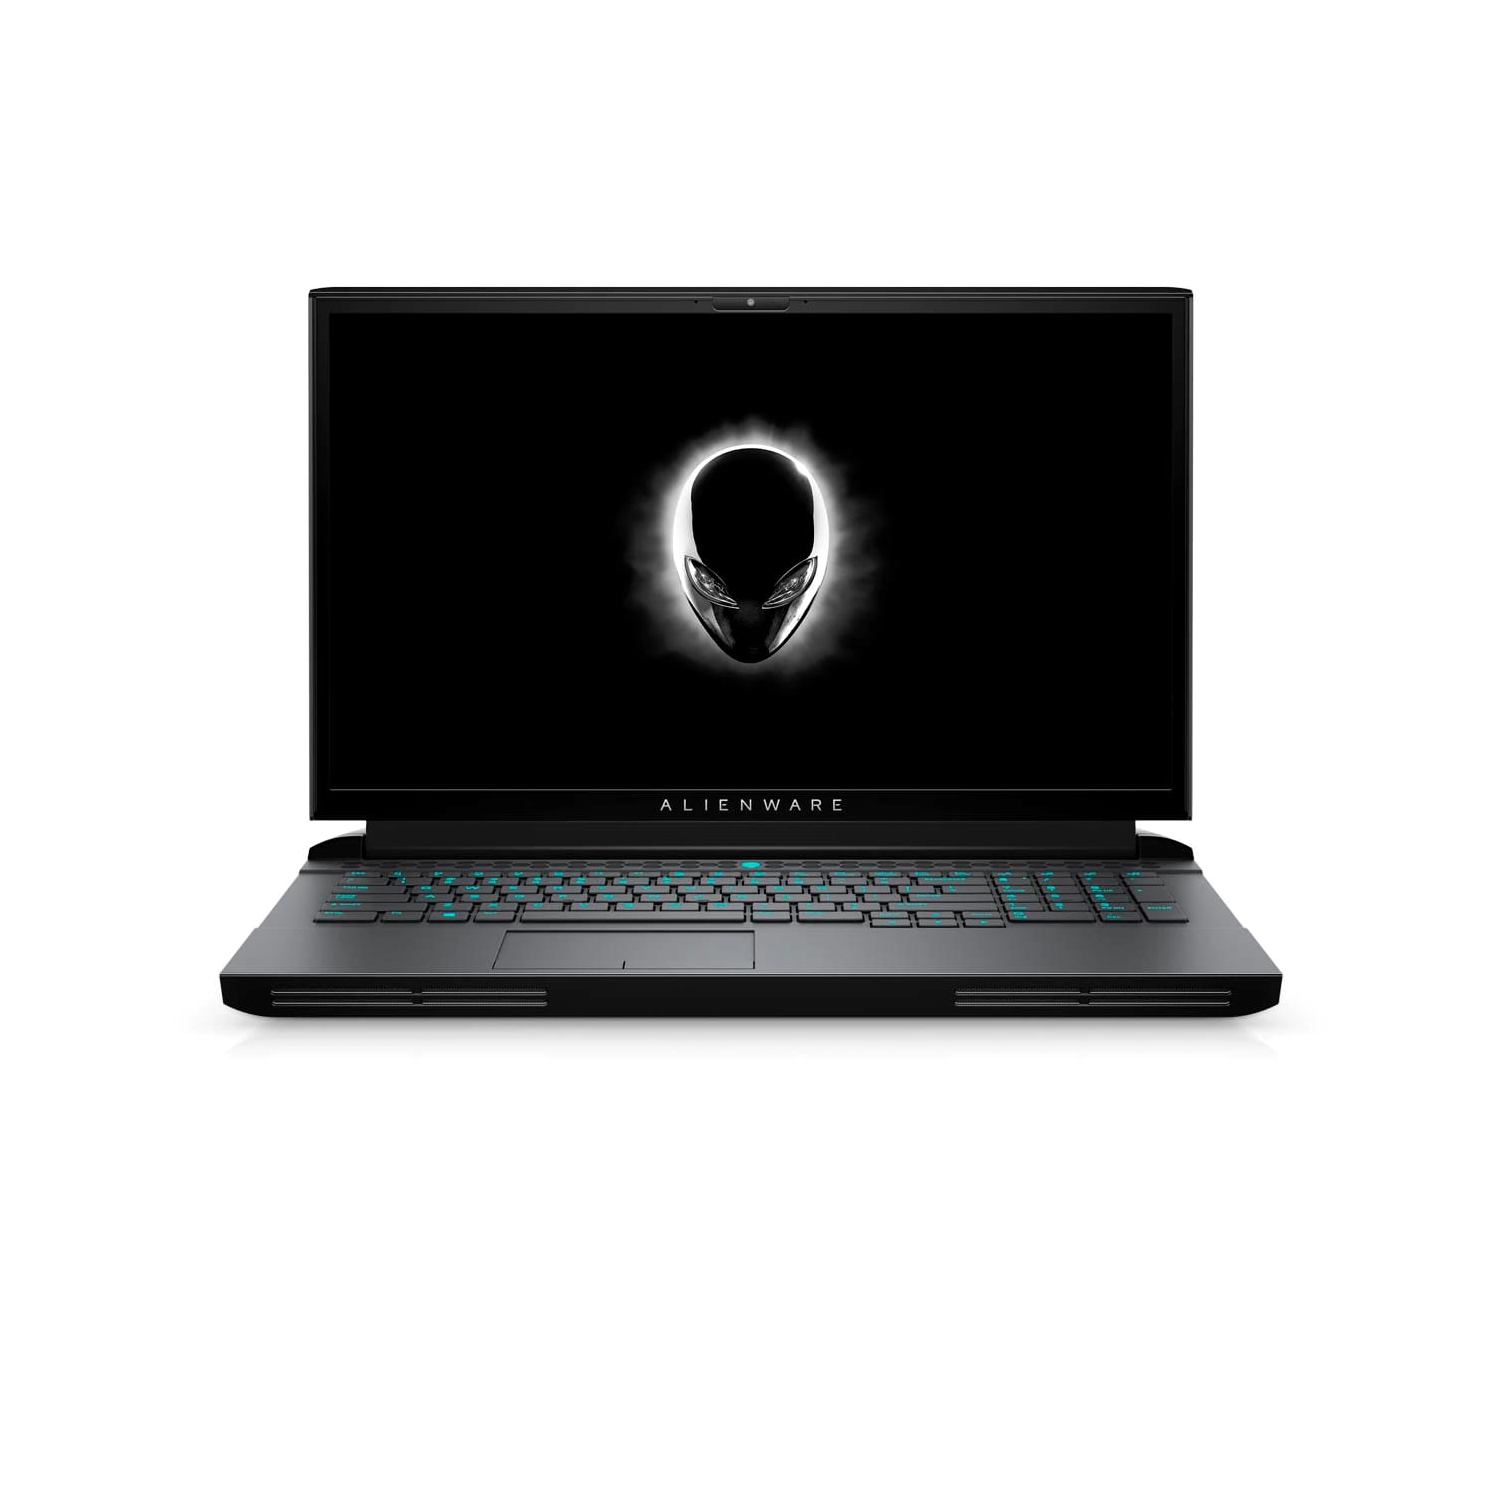 Refurbished (Excellent) - Dell Alienware 17 51m R2 Gaming Laptop (2020), 17.3" FHD, Core i7 - 2TB SSD + 2TB SSD - 64GB RAM - 2070 Super, 4.8 GHz - 10th Gen CPU Certified